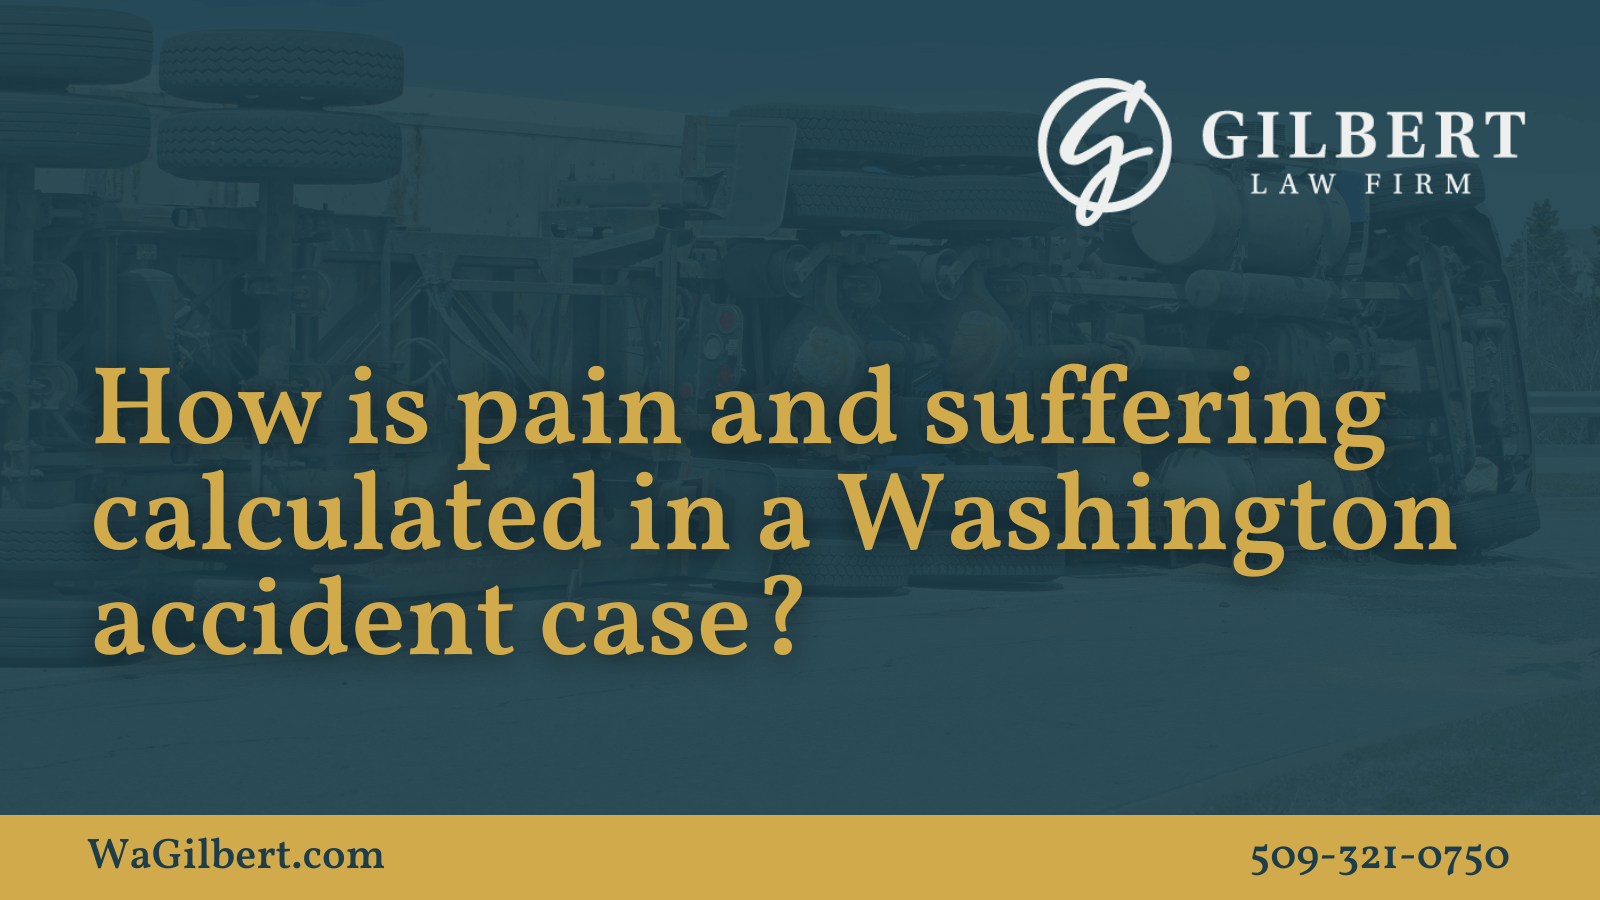 How is pain and suffering calculated in a Washington accident case- Gilbert Law Firm Spokane Washington